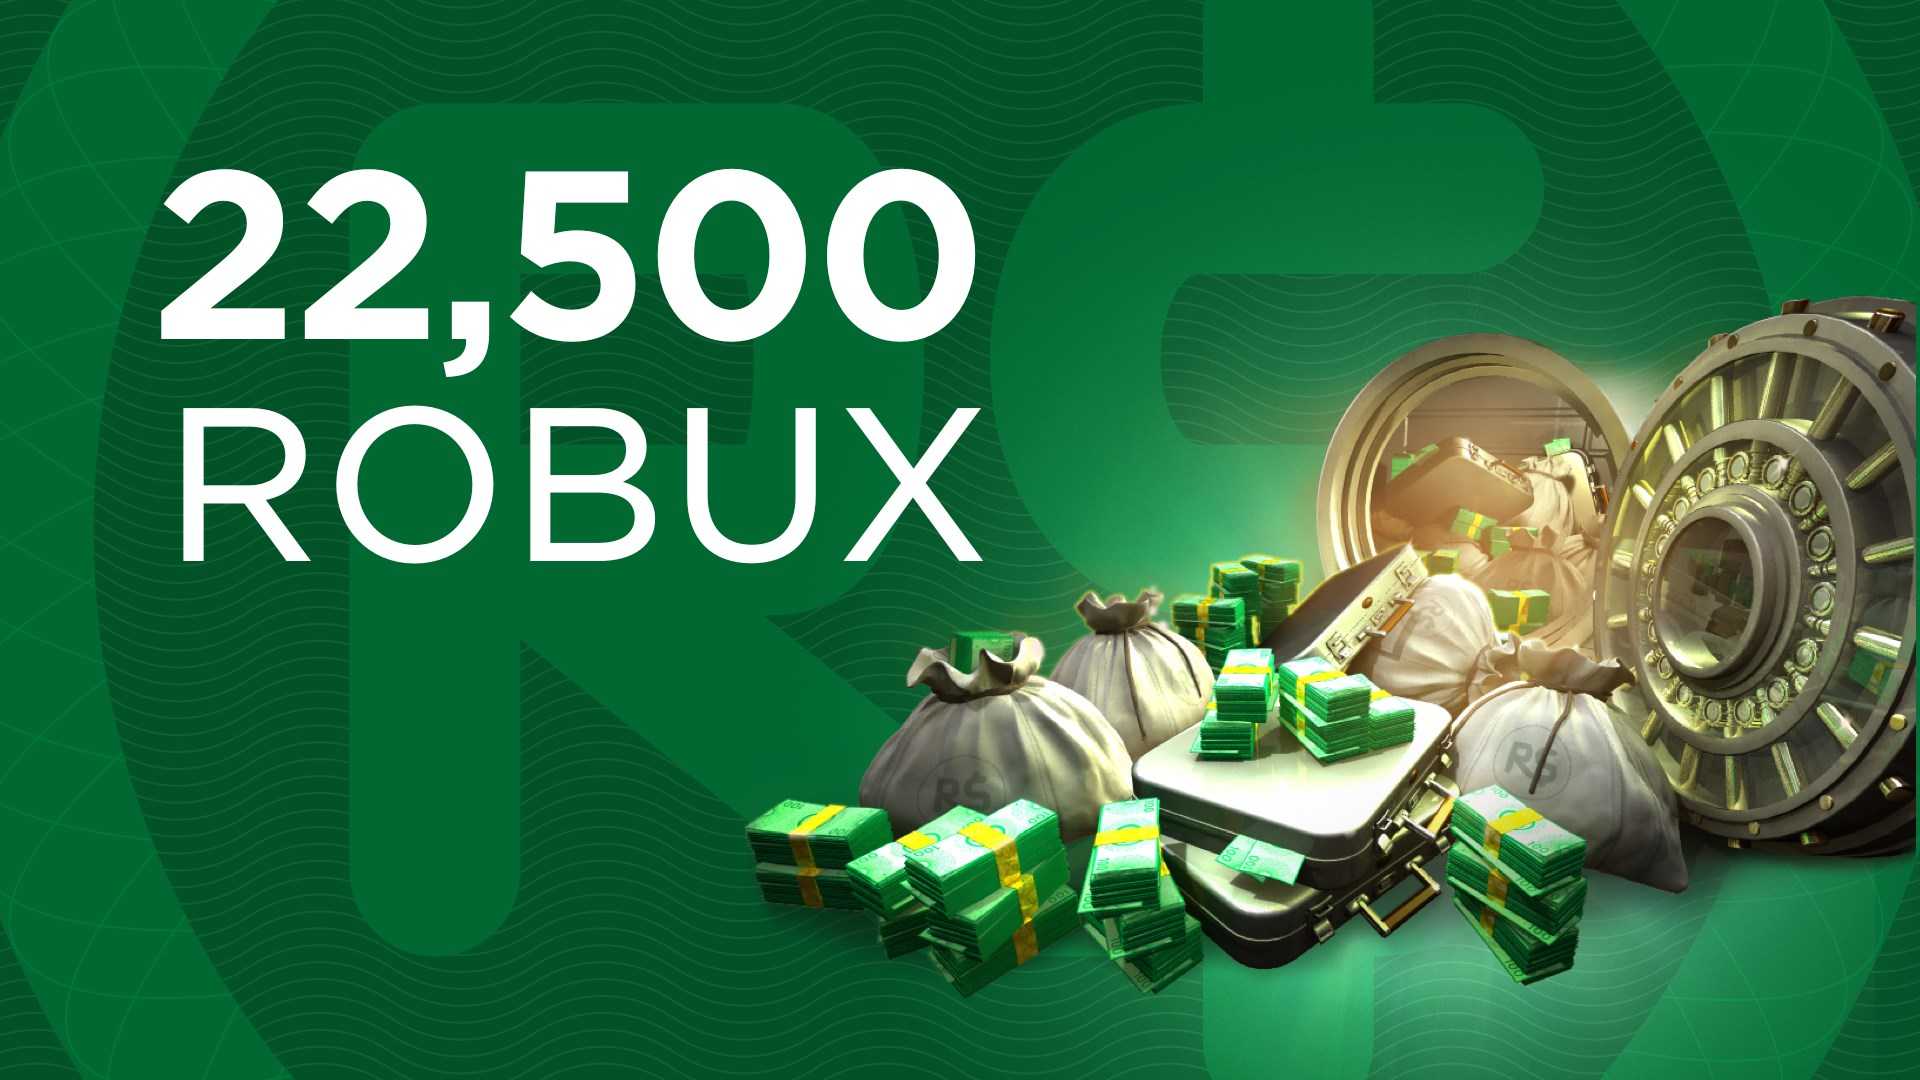 $22,500 ROBUX Giveaway! 